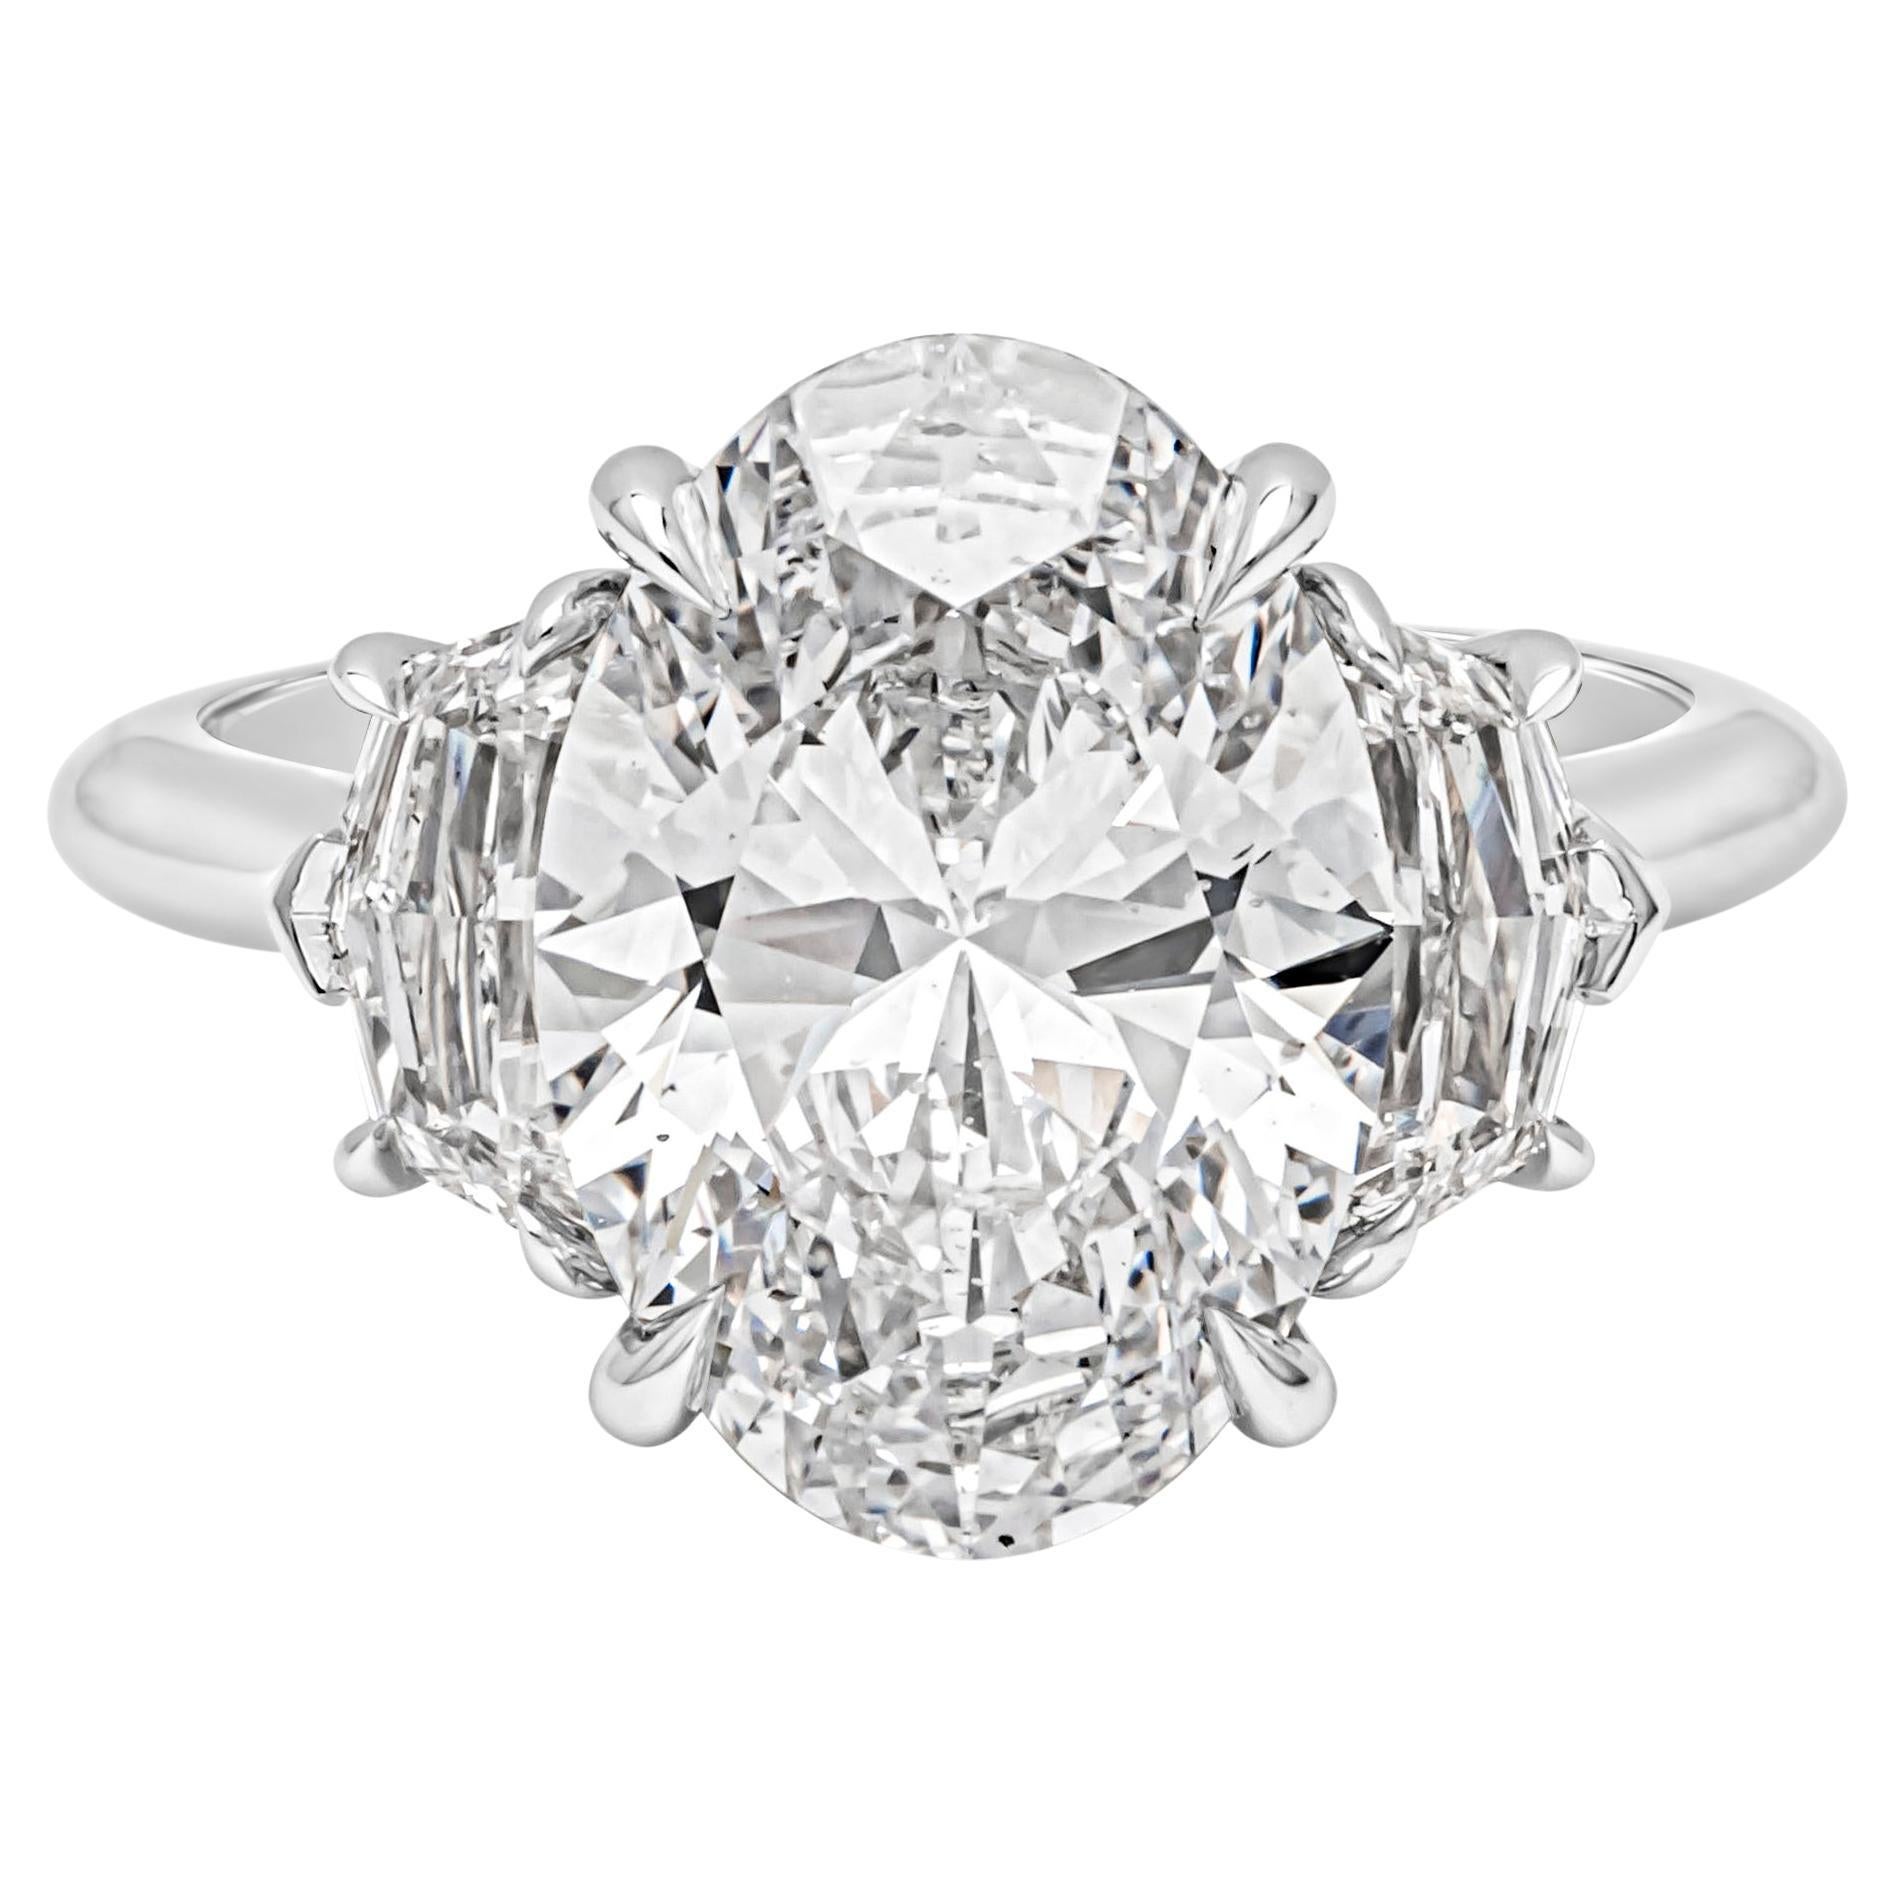 Elegantly made three stone ring featuring an oval cut diamond weighing 5.11 carats flanked by two epaulet diamond on each side, weighing 1.02 carats total, D-E color and VS in clarity. GIA certified the center diamond as D color, SI1 in clarity and